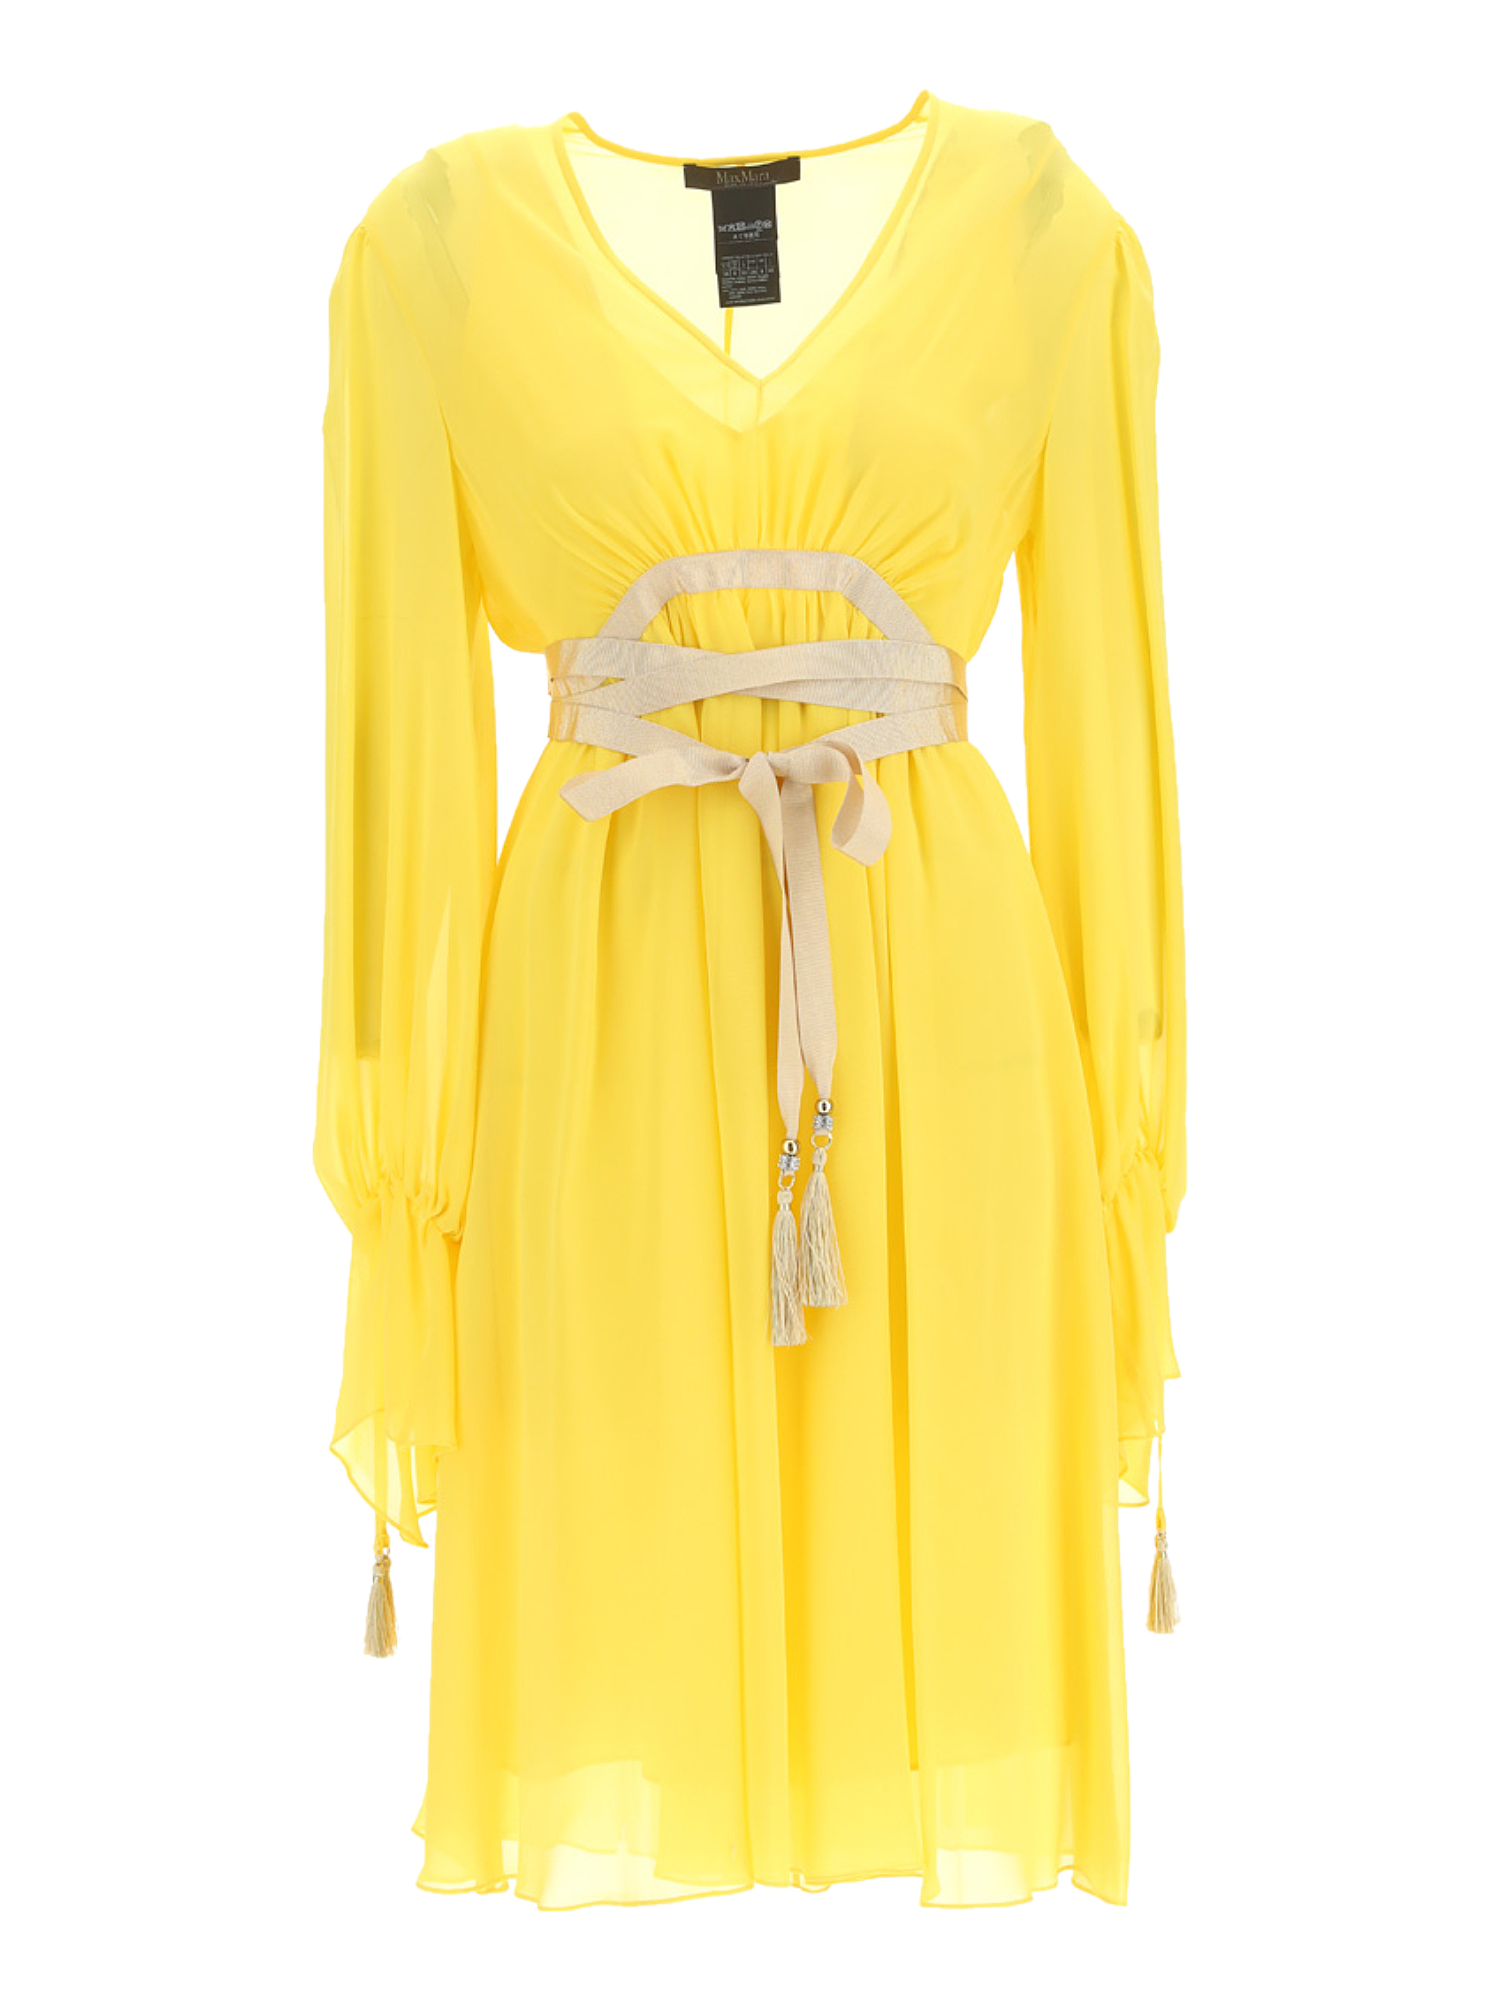 Condition: New With Tag,  Silk, Color: Yellow - S - IT 40 -